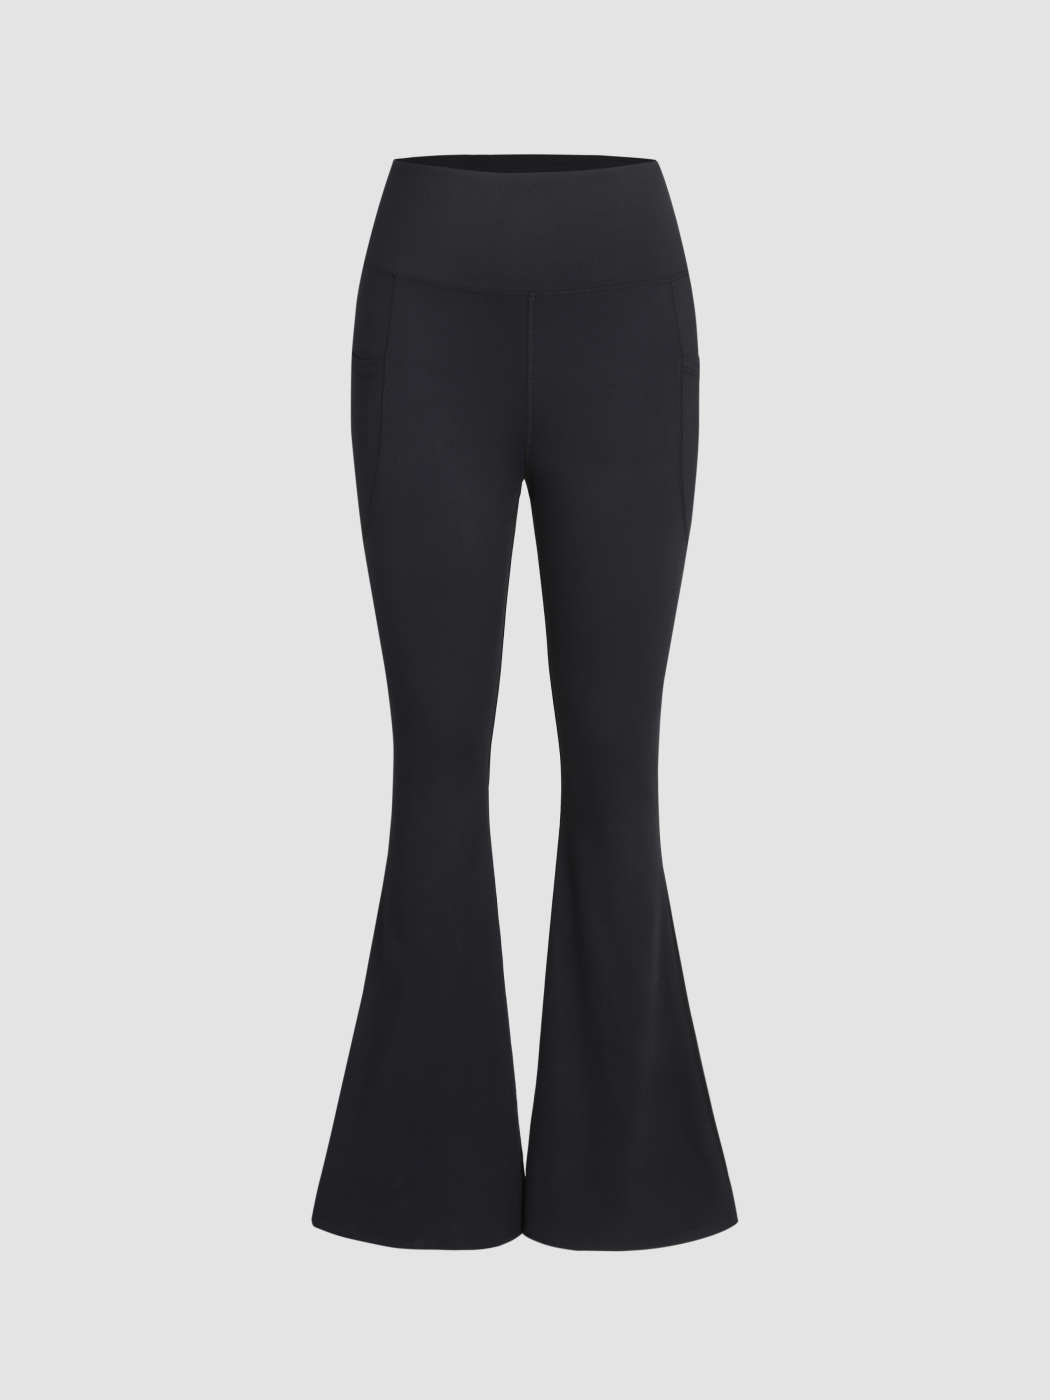 High Waist Solid Flared Leggings Sporty by Cider - Cider